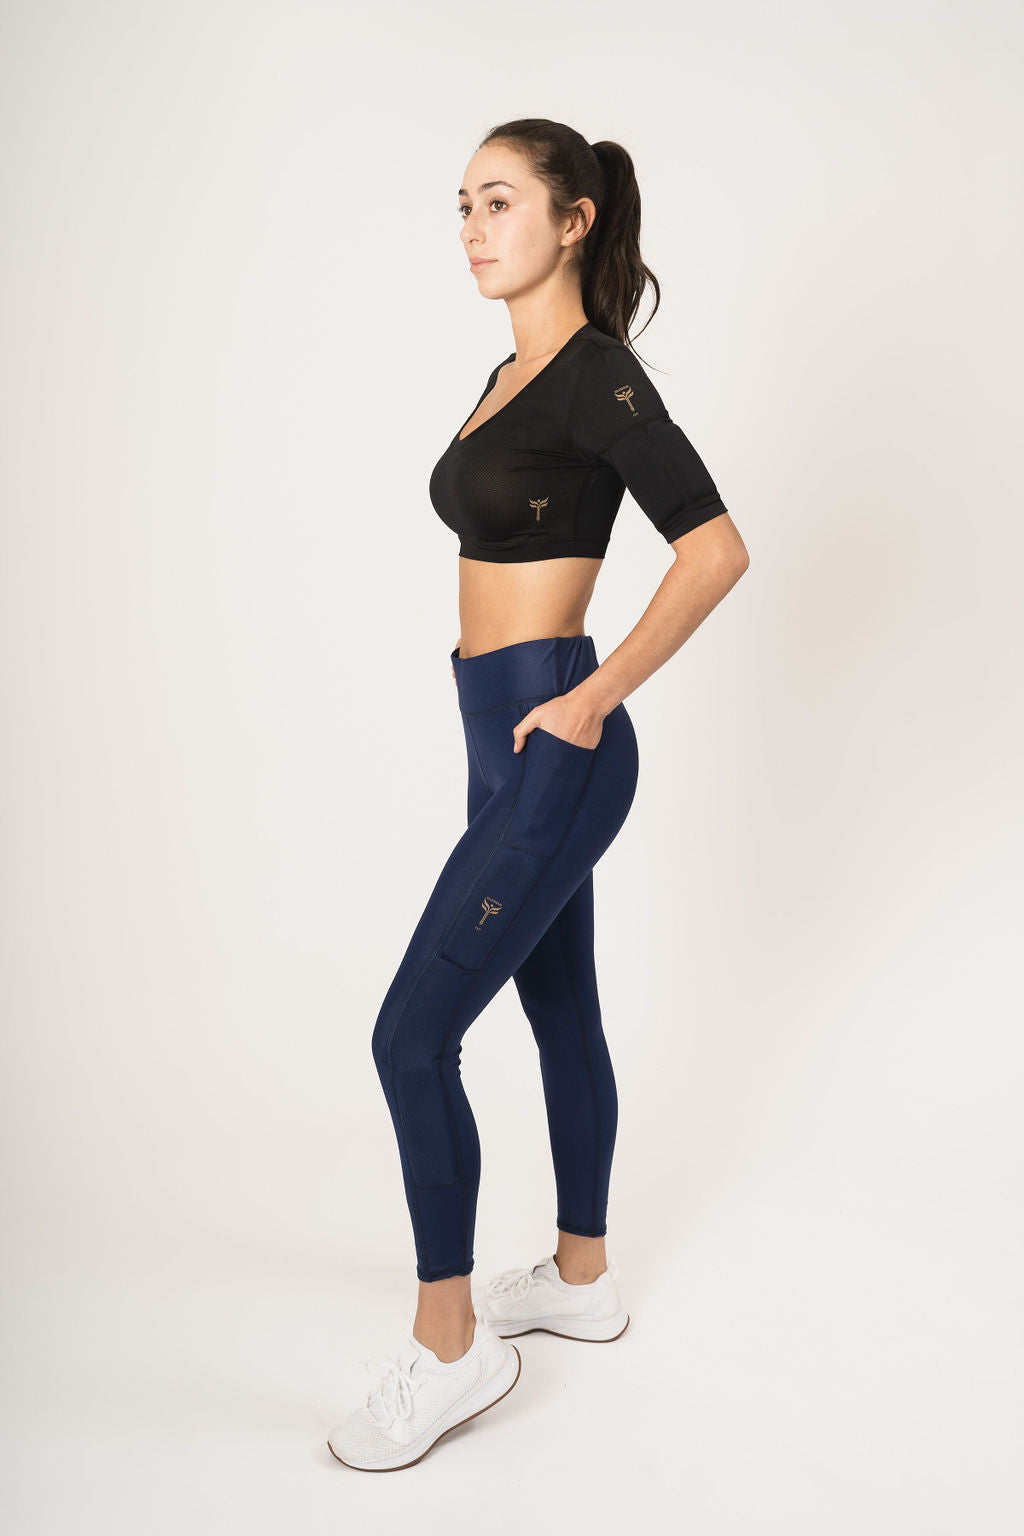 Woman wearing the weighted black crop tops with the weights on the arms and wearing the navy shiny leggings with the weights down the legs, with one weight above the knee and one weight below the knee and hands in the cell phone pocket